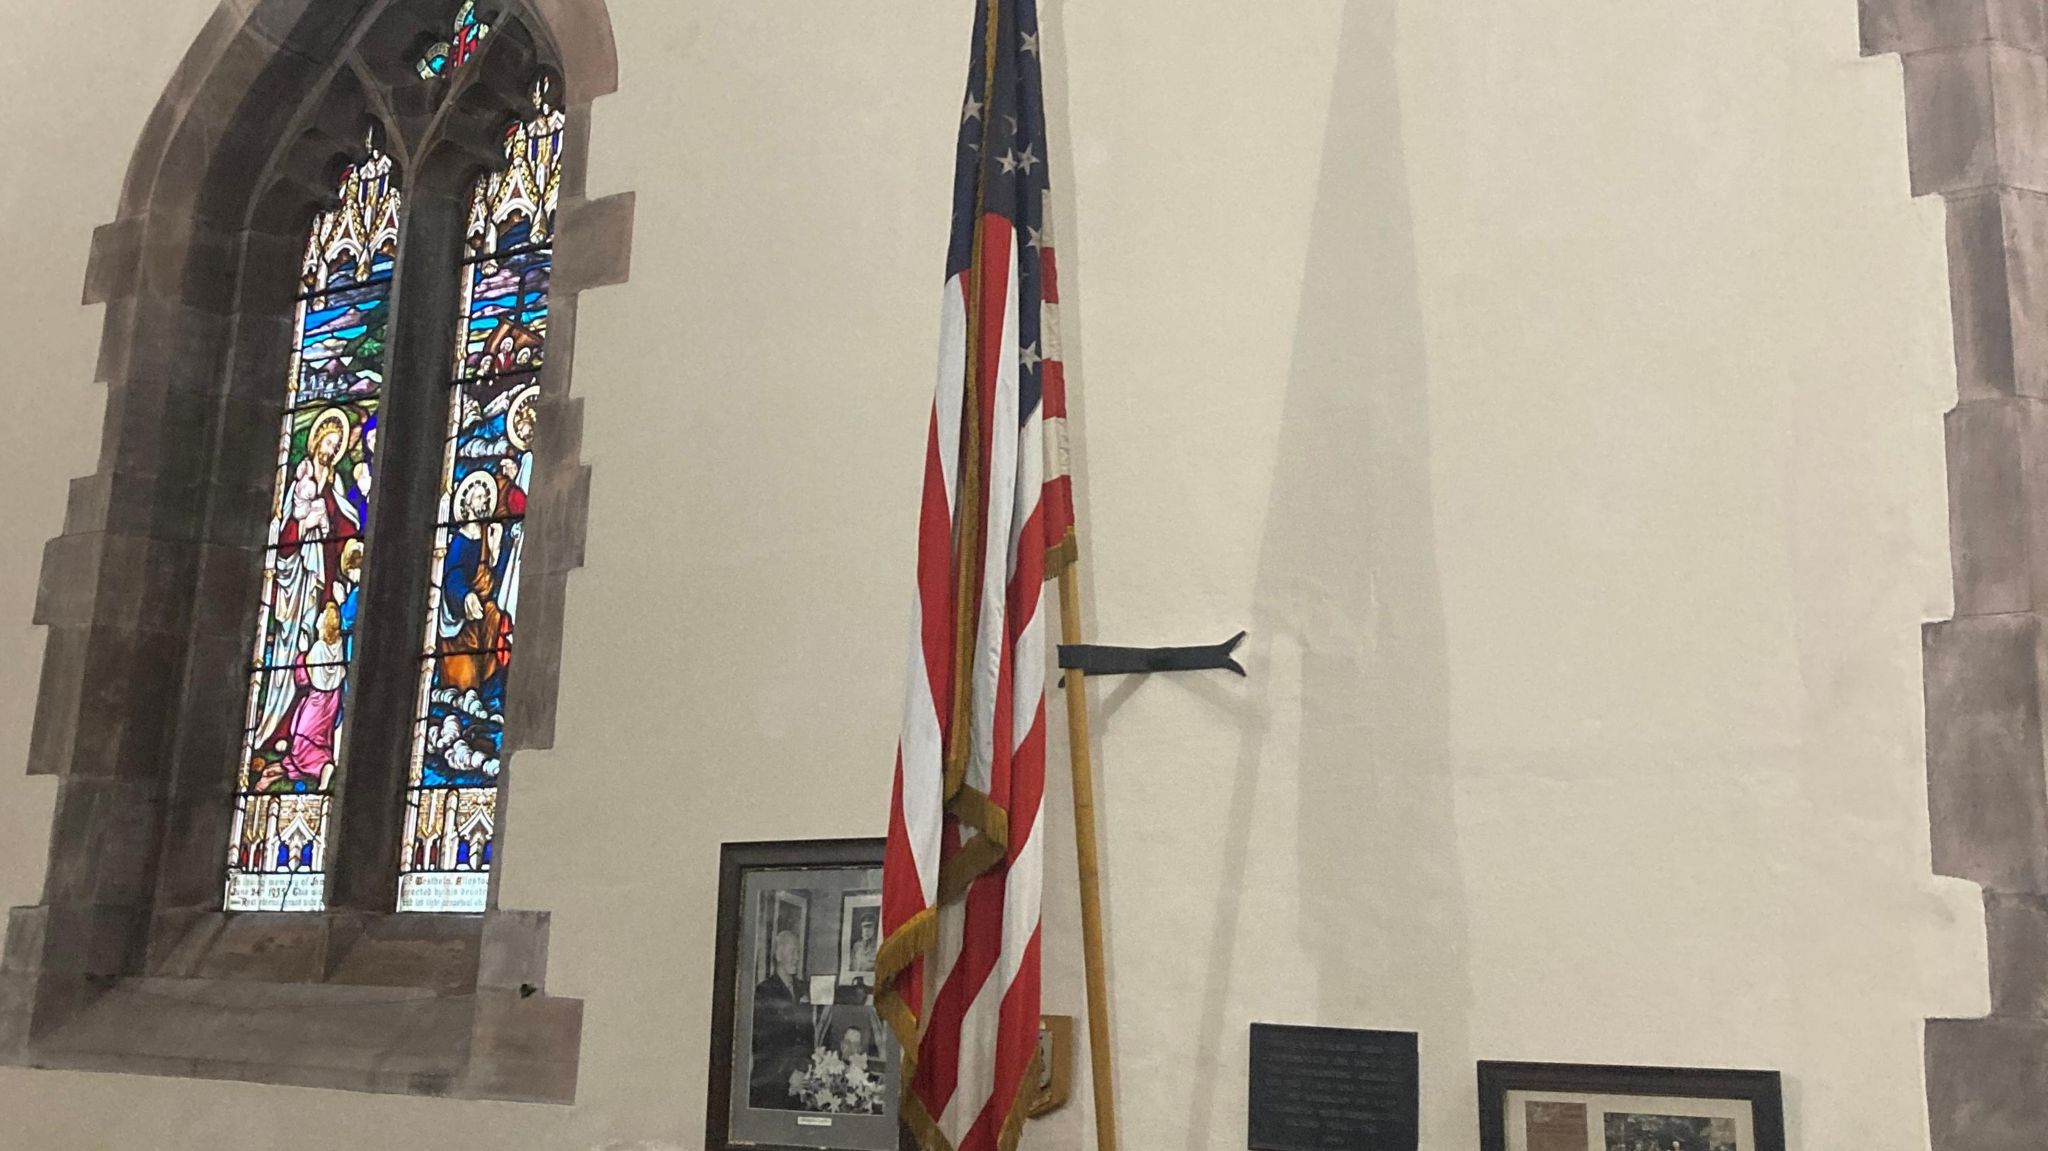 The flag presented by George Patton to St Lawrence church, Cheshire